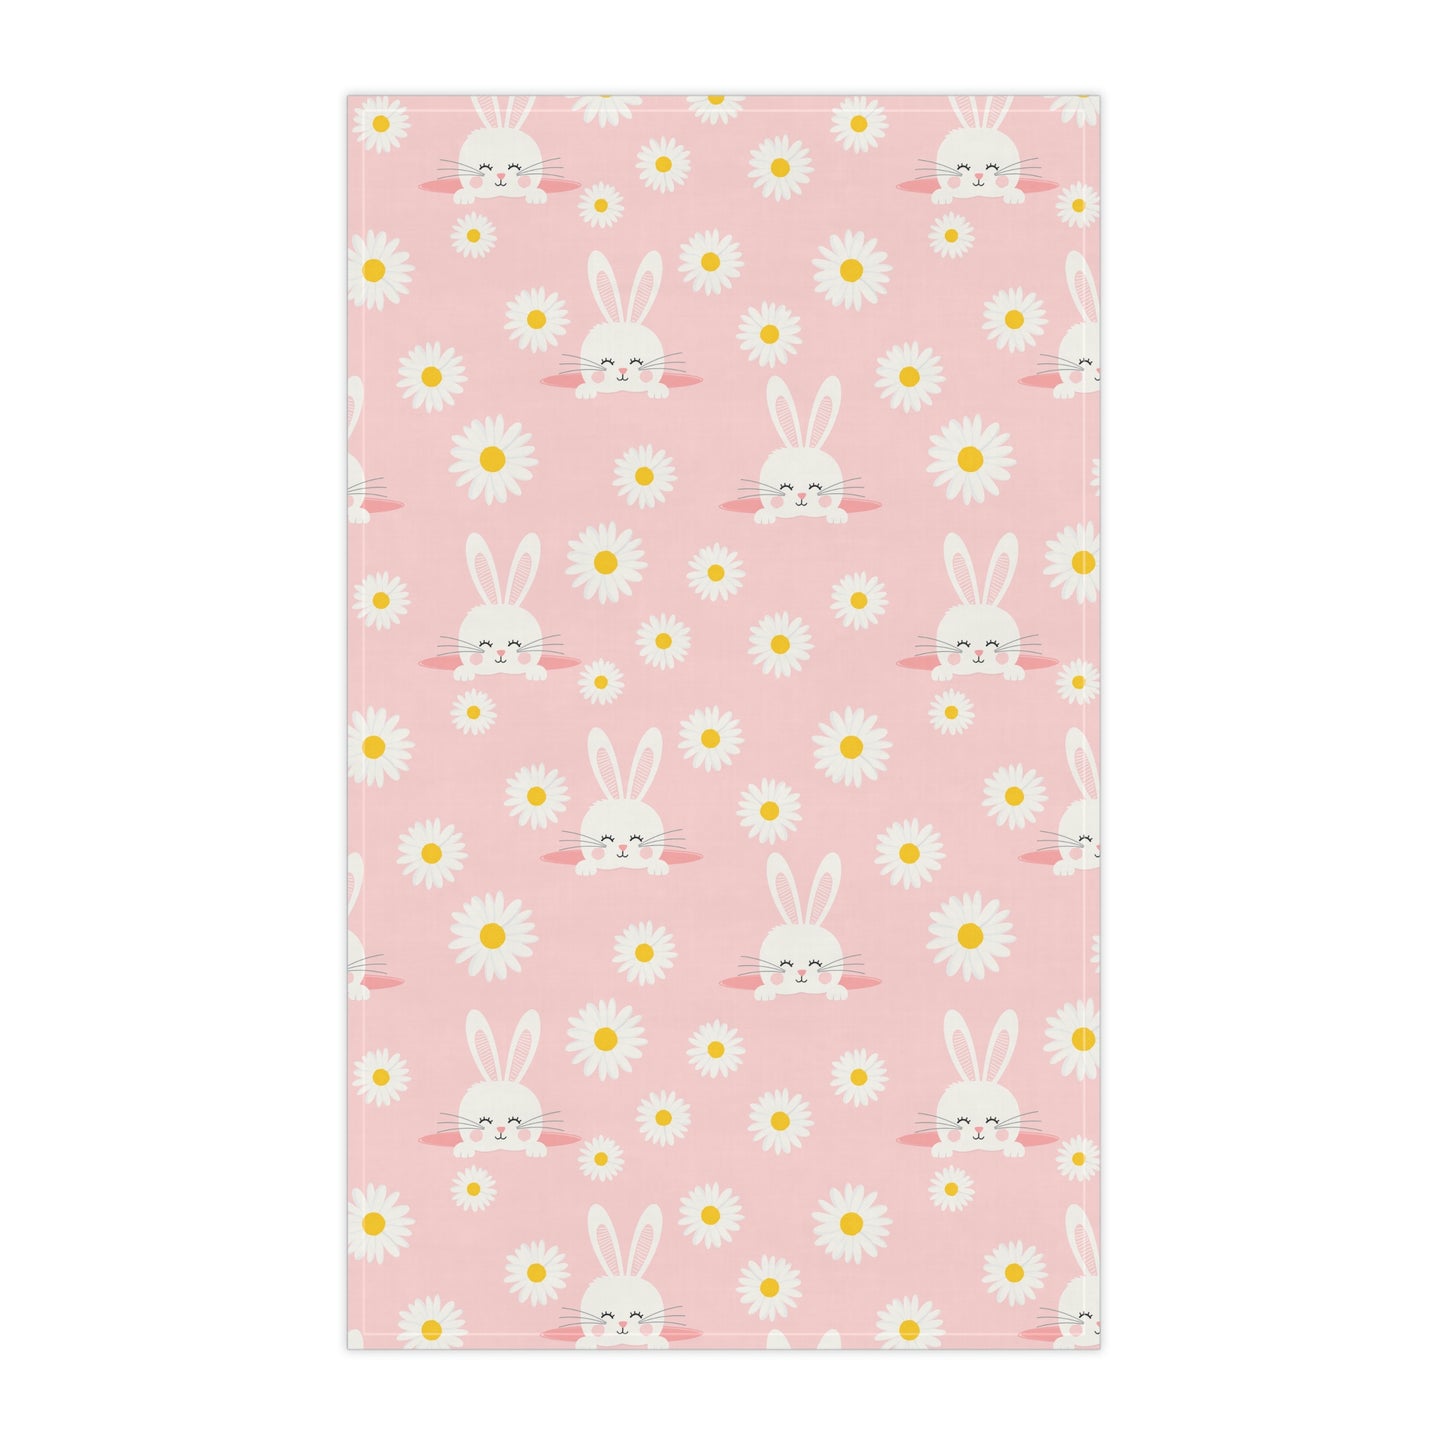 Smiling Bunnies and Daisies Kitchen Towel